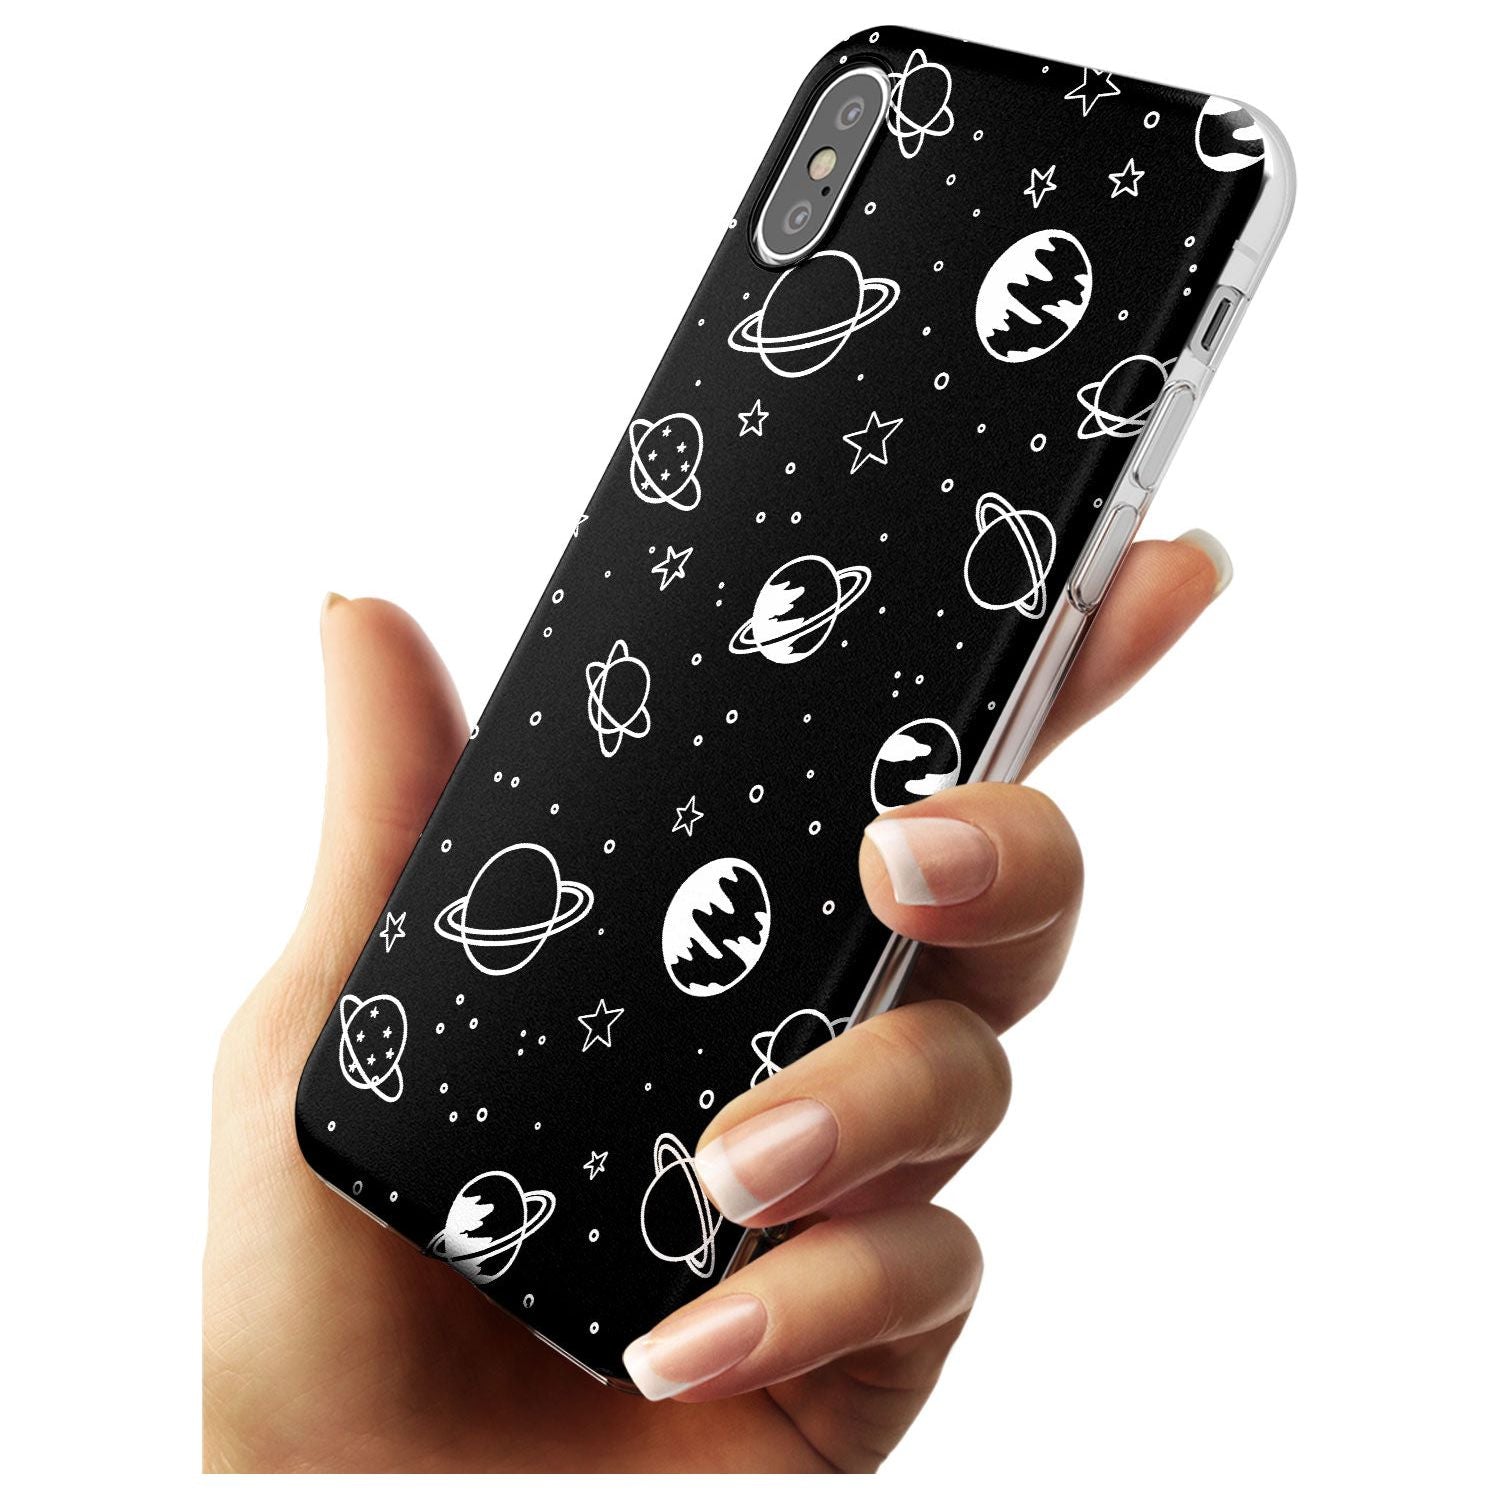 Outer Space Outlines: White on Black Black Impact Phone Case for iPhone X XS Max XR